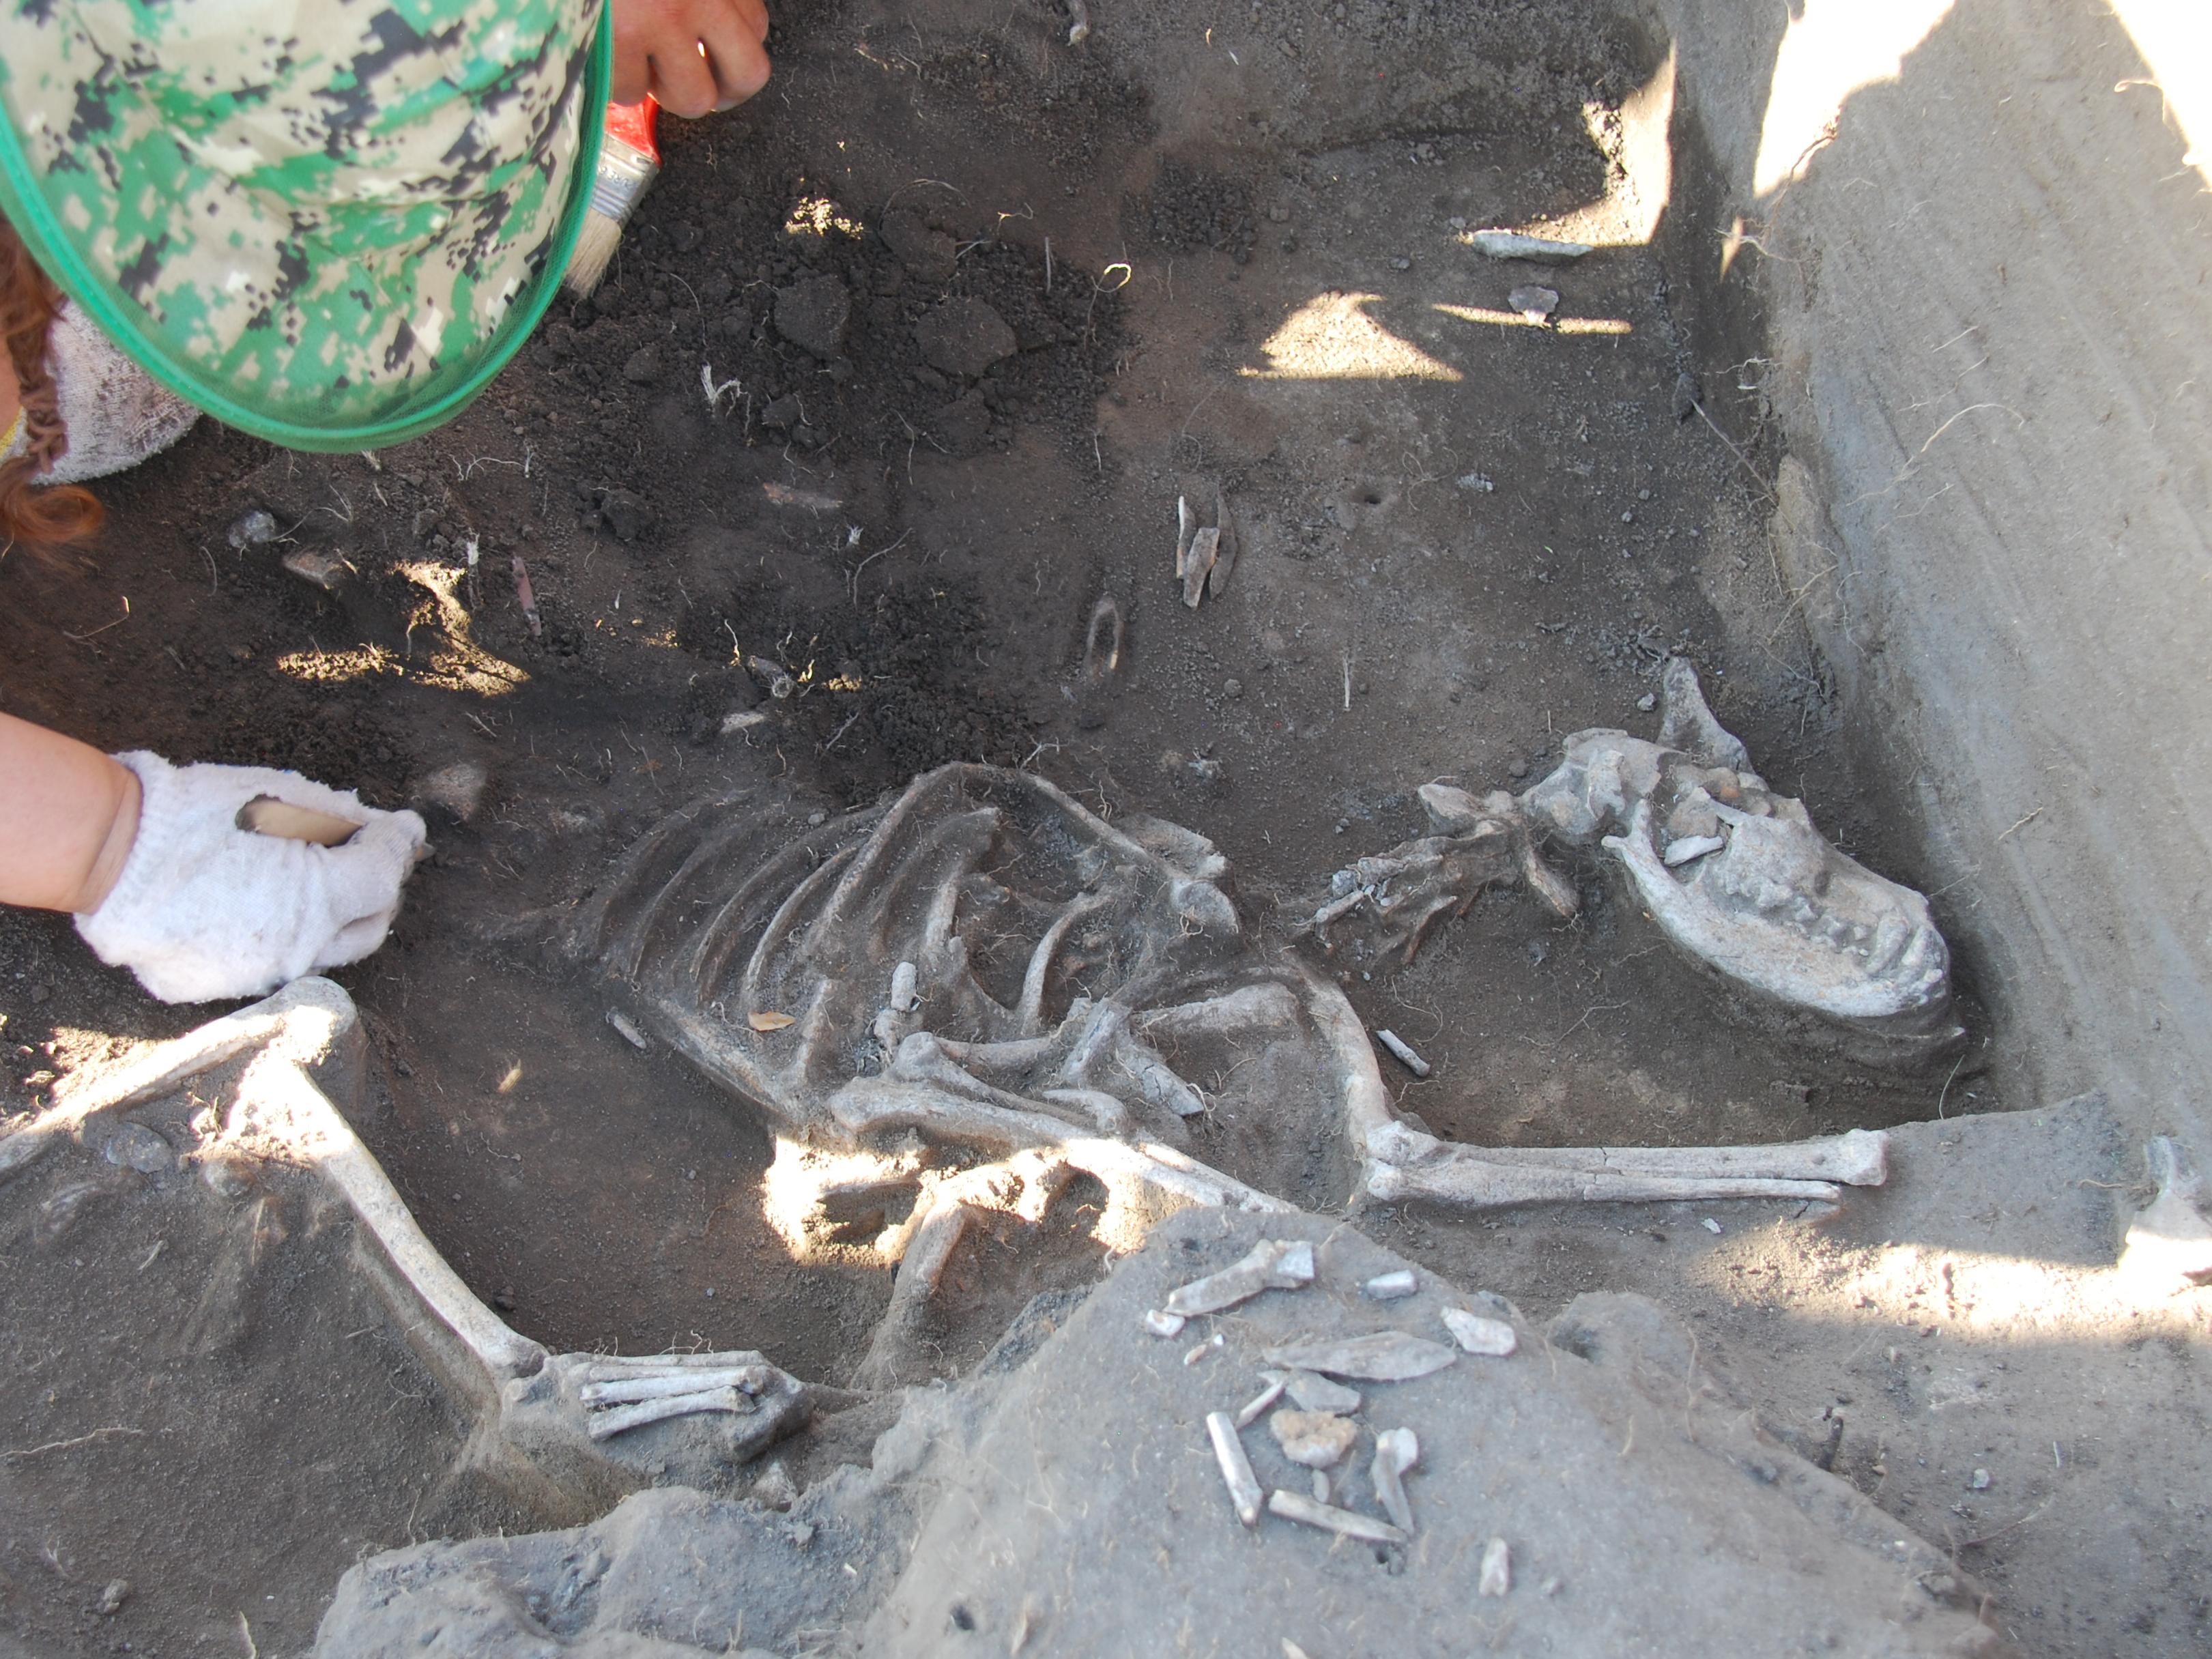 A skeleton of a dog being excavated